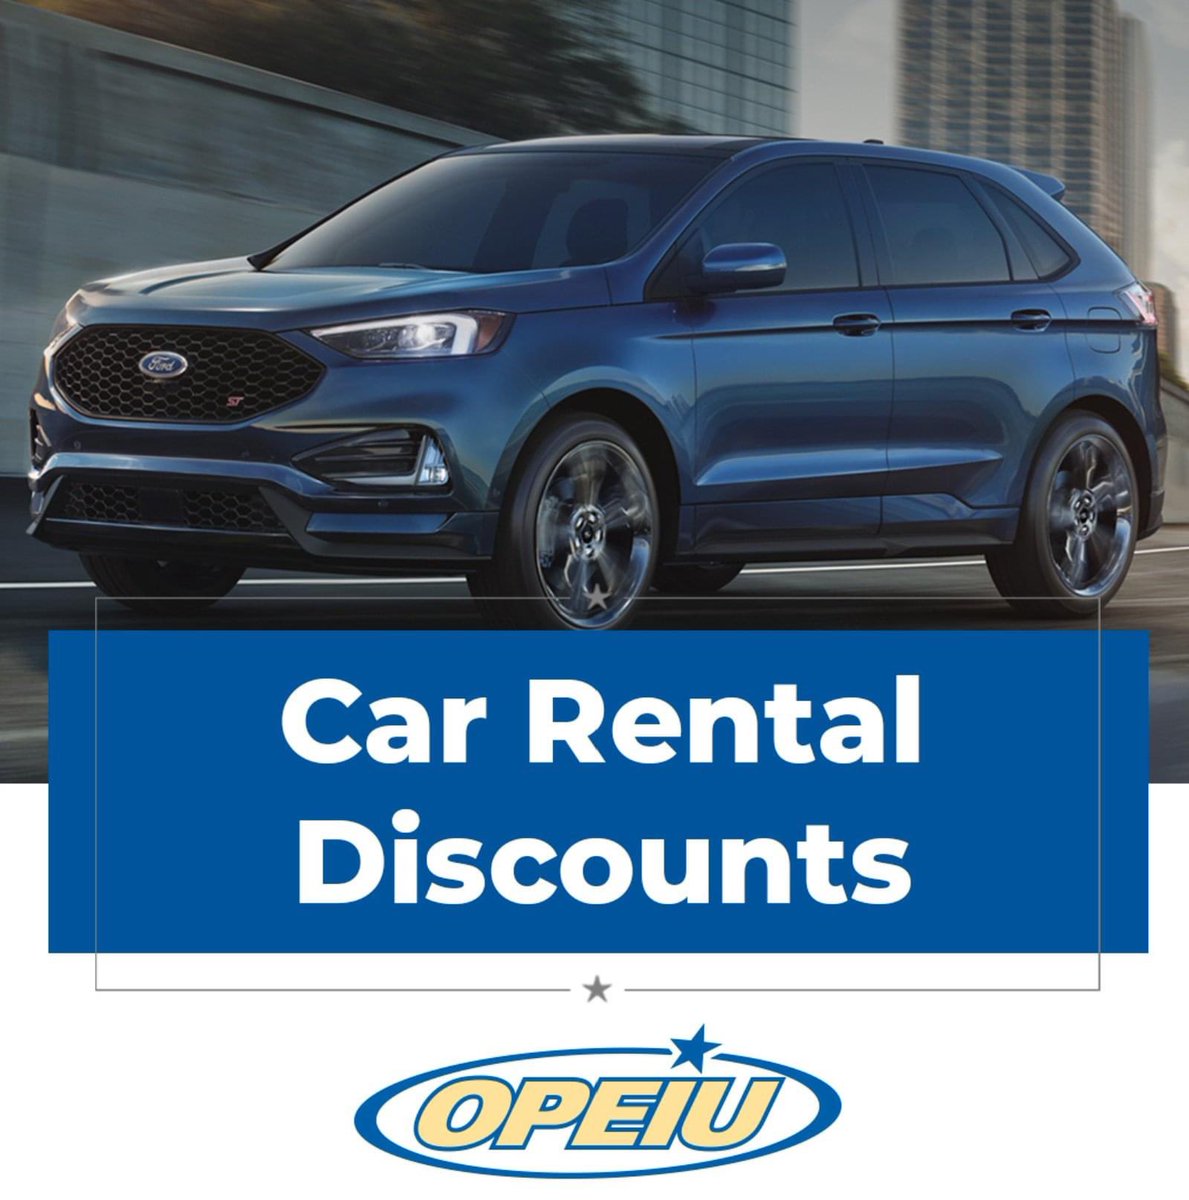 It’s easy to stay a little longer when the car rental deals are this good. Union members, enjoy up to 35% off base rates with Union Plus! Book now: unionplus.click/y2o